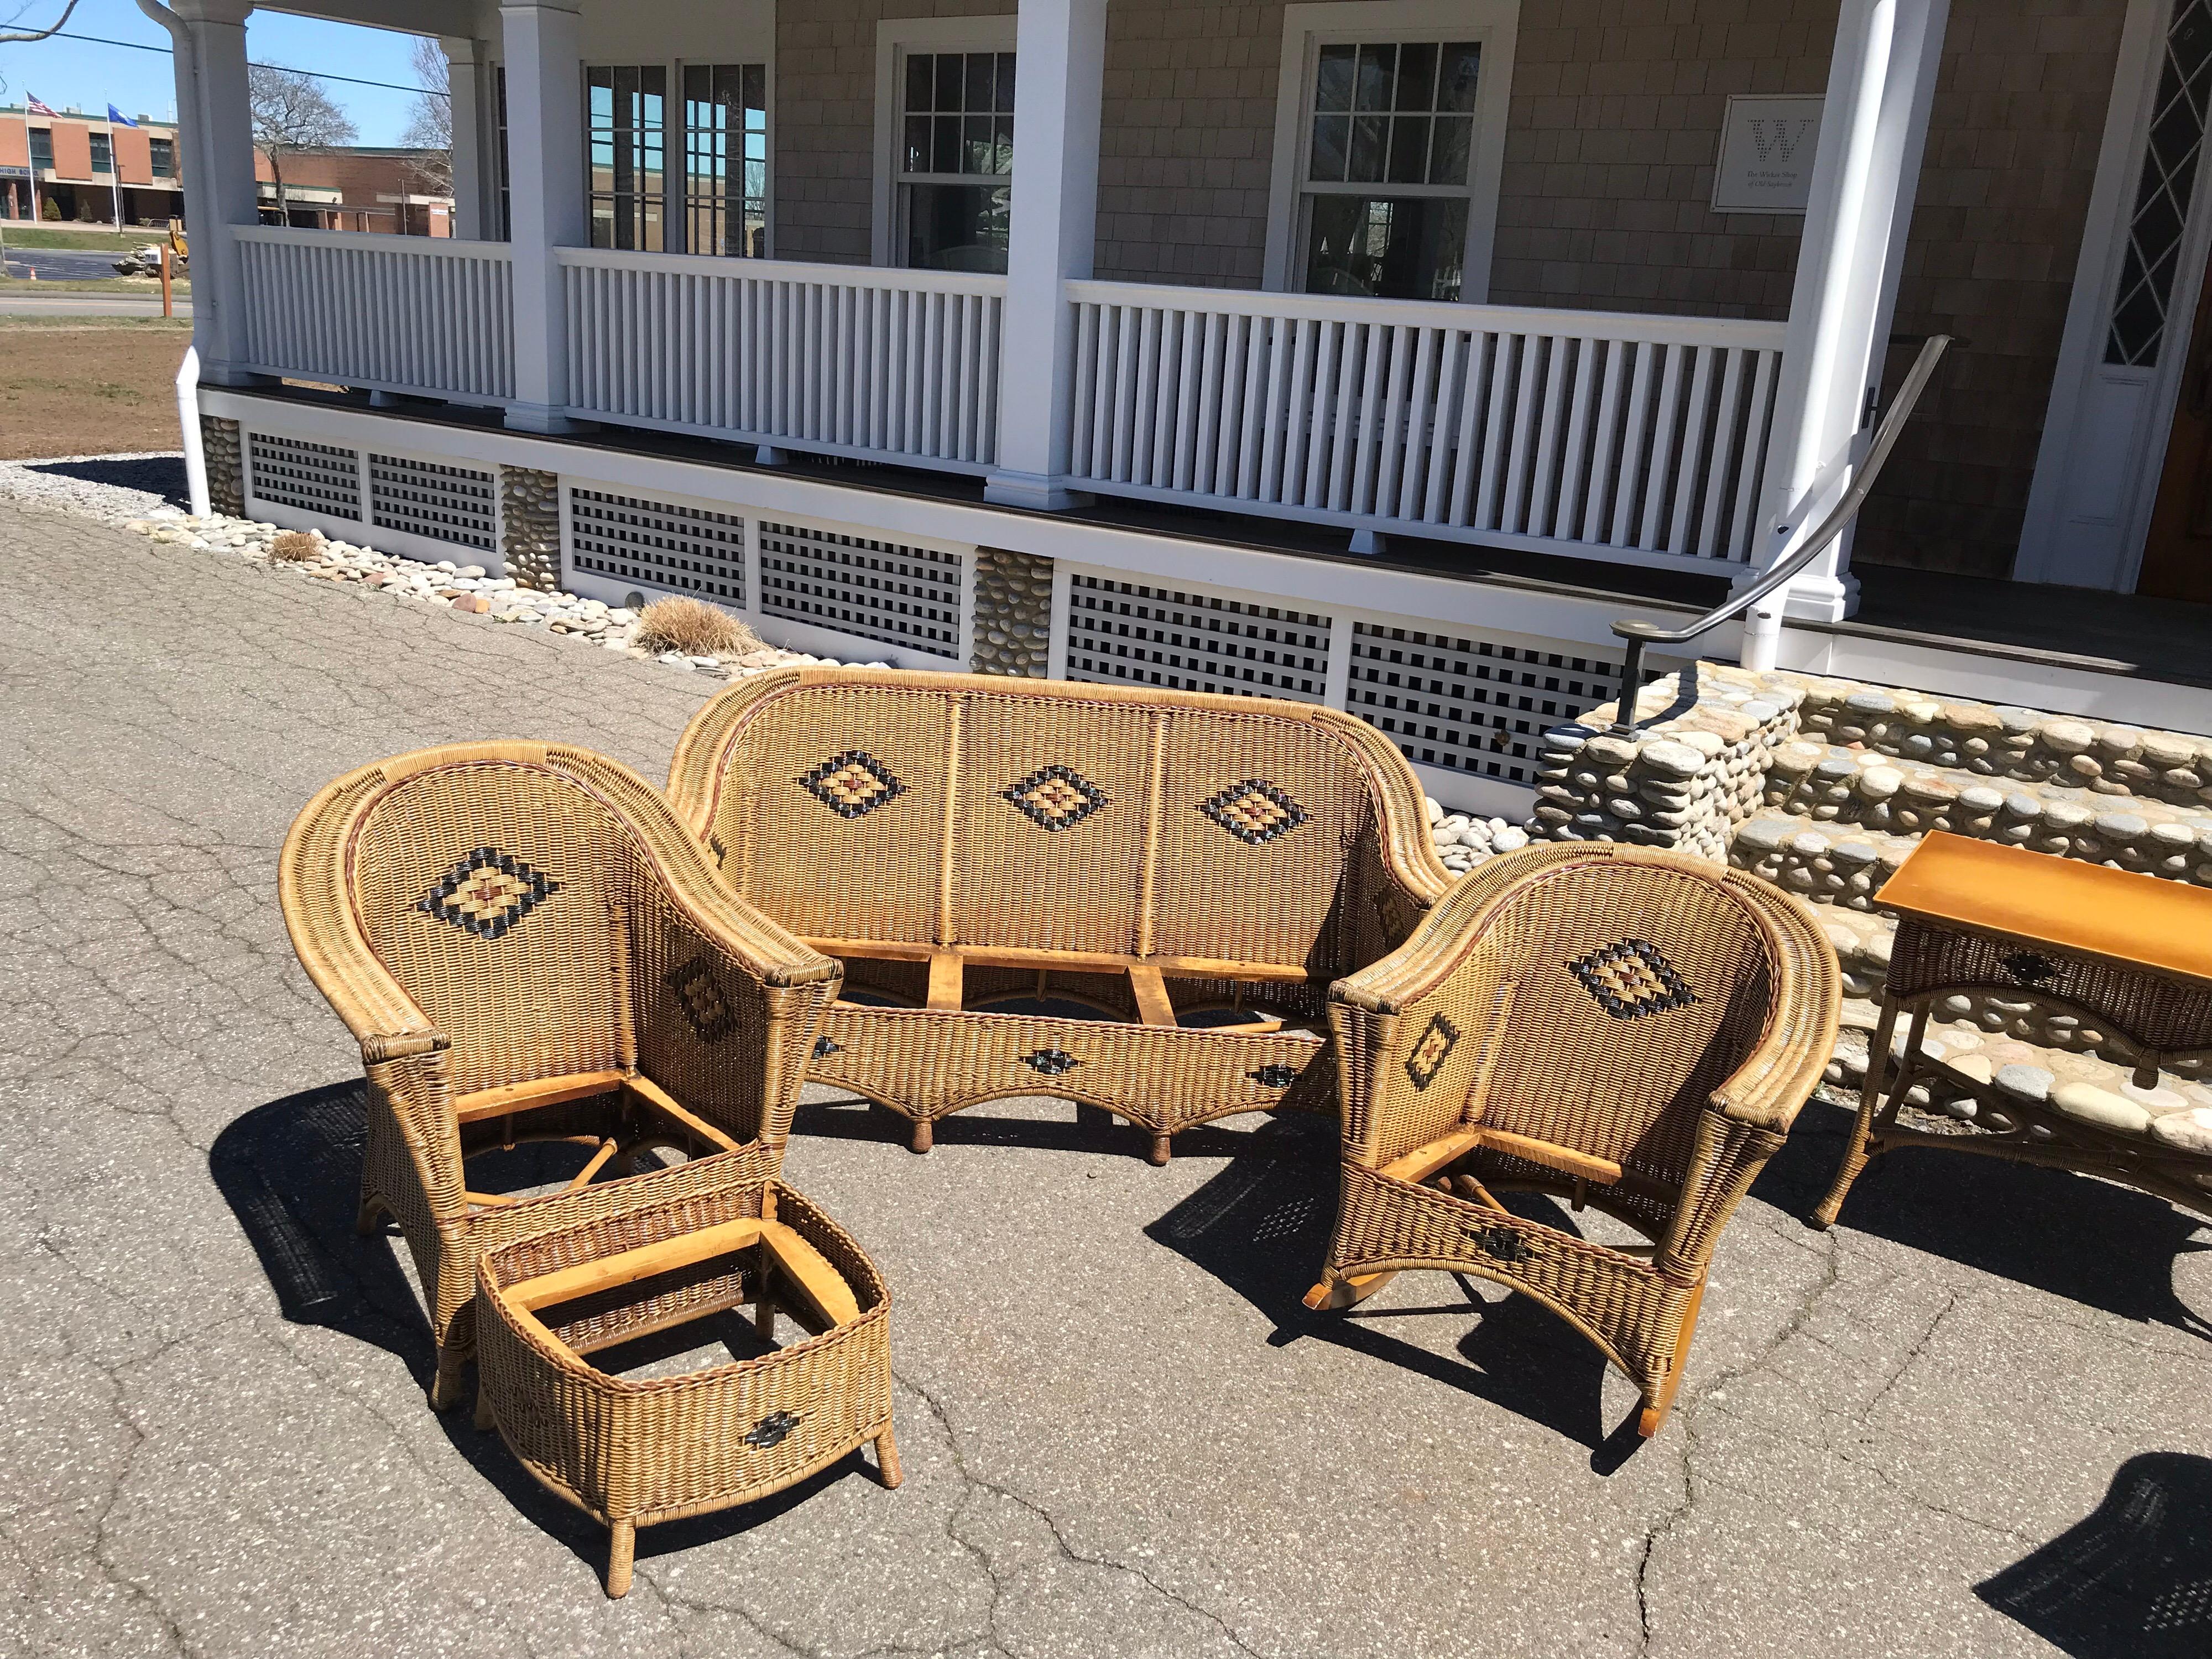 This is a rare twelve-piece antique wicker ensemble by The Brighton Furniture Company of Island Pond, Vermont. Manufactured in the 1920s, it was purchased new in 1929 by the Vermont Masonic Lodge. The set is comprised of two sofas, four chairs, two